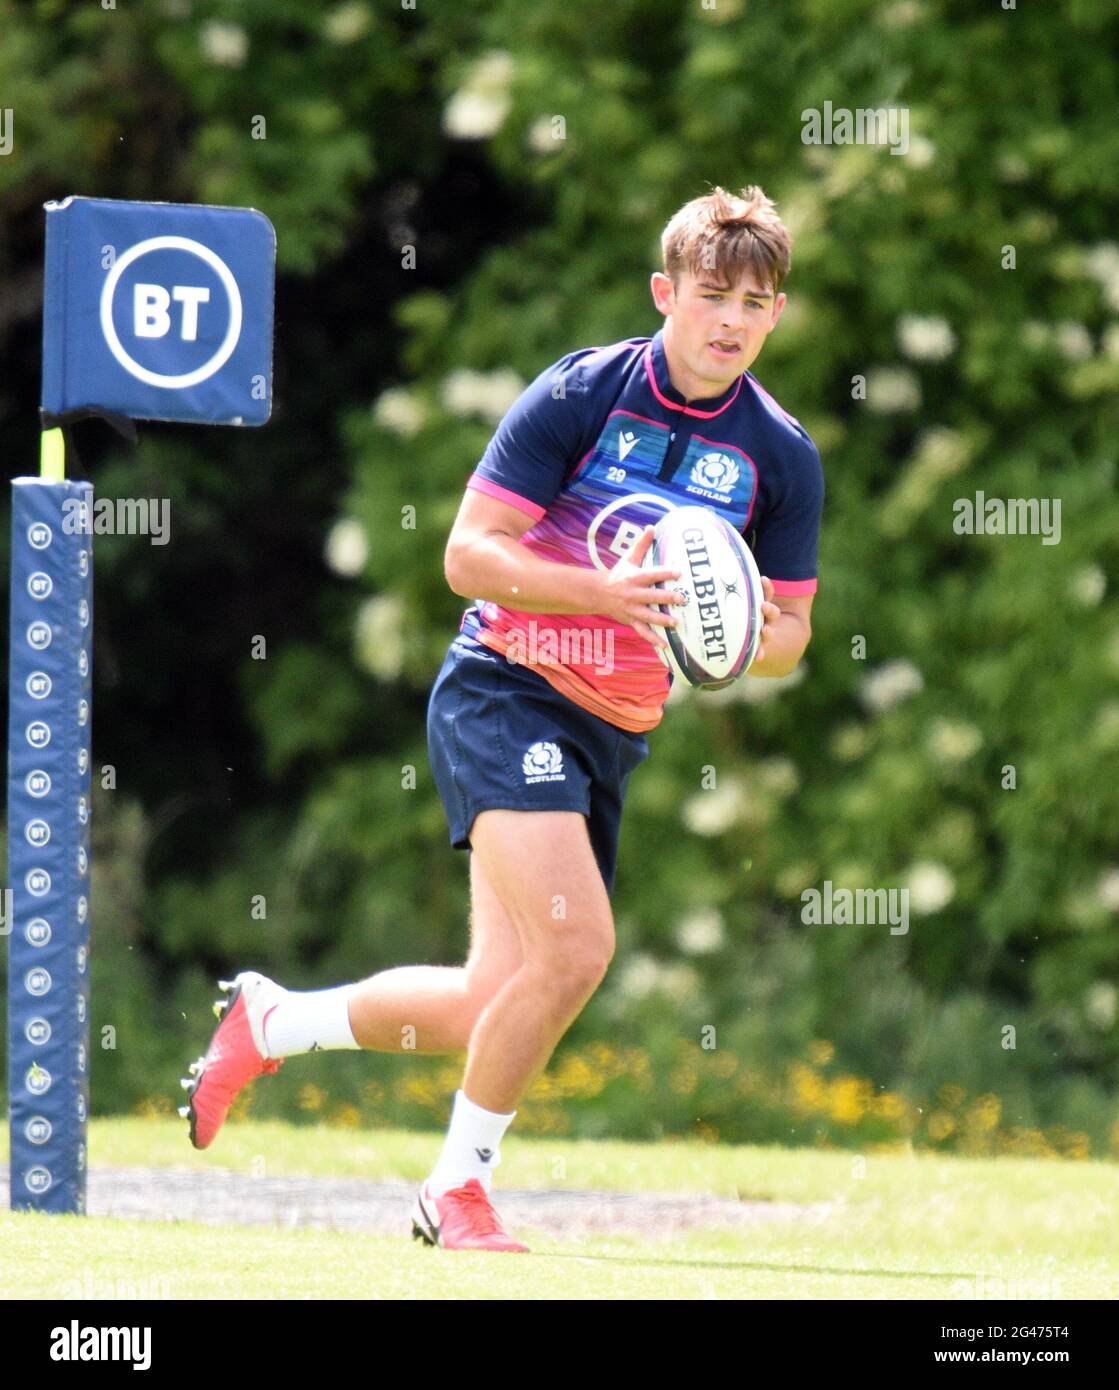 Oriam Sports Performance Centre, Riccarton, Edinburgh, Scotland. UK .18th June 21.Scotland Rugby squad : Ross Thompson is pictured during training session for the England A fixture . Credit: eric mccowat/Alamy Live News Stock Photo